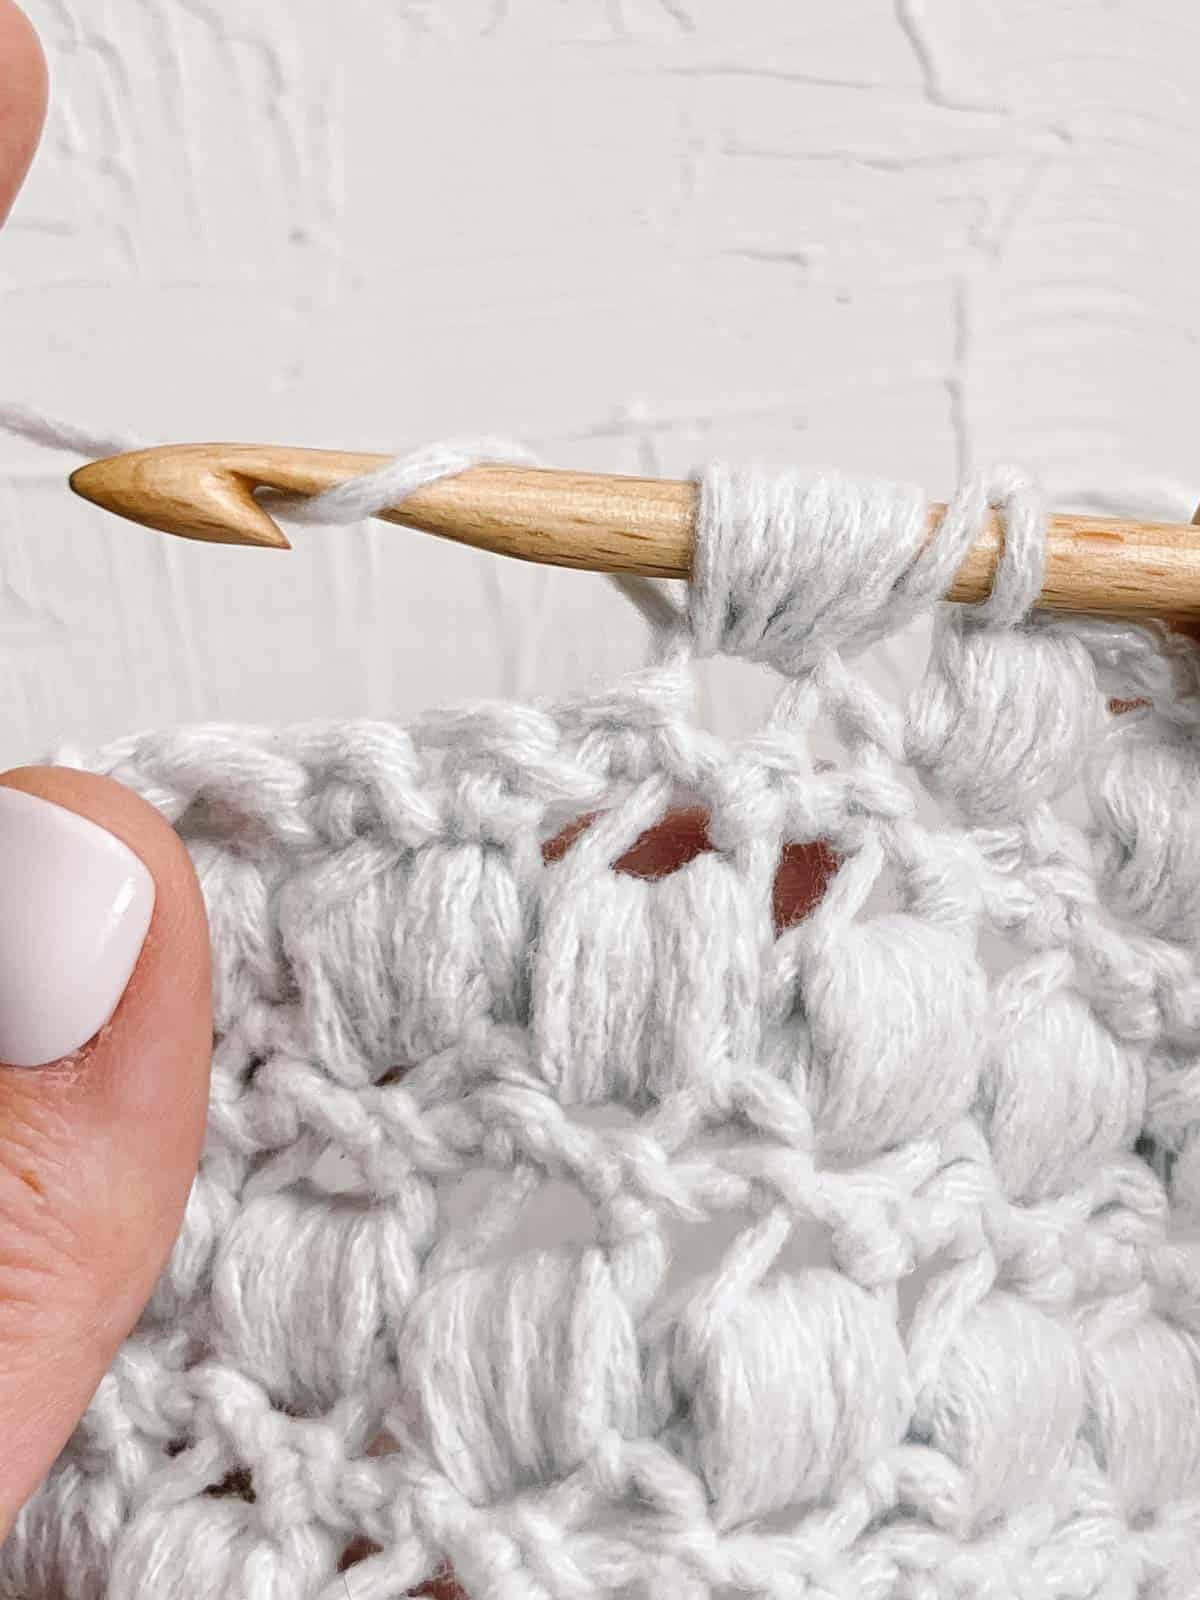 Yarn over to pull through seven loops on crochet hook.